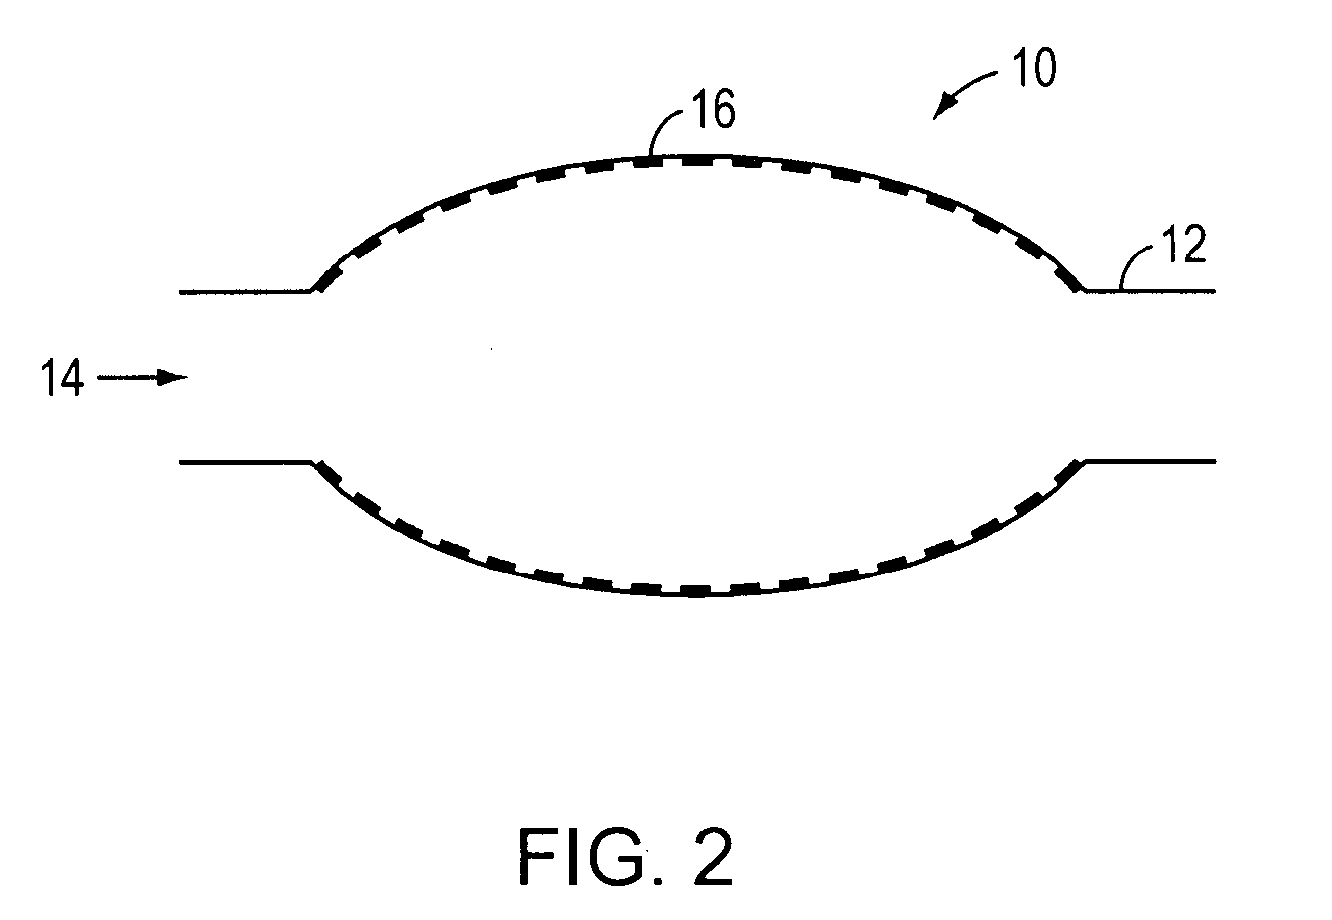 Endovascular devices with axial perturbations